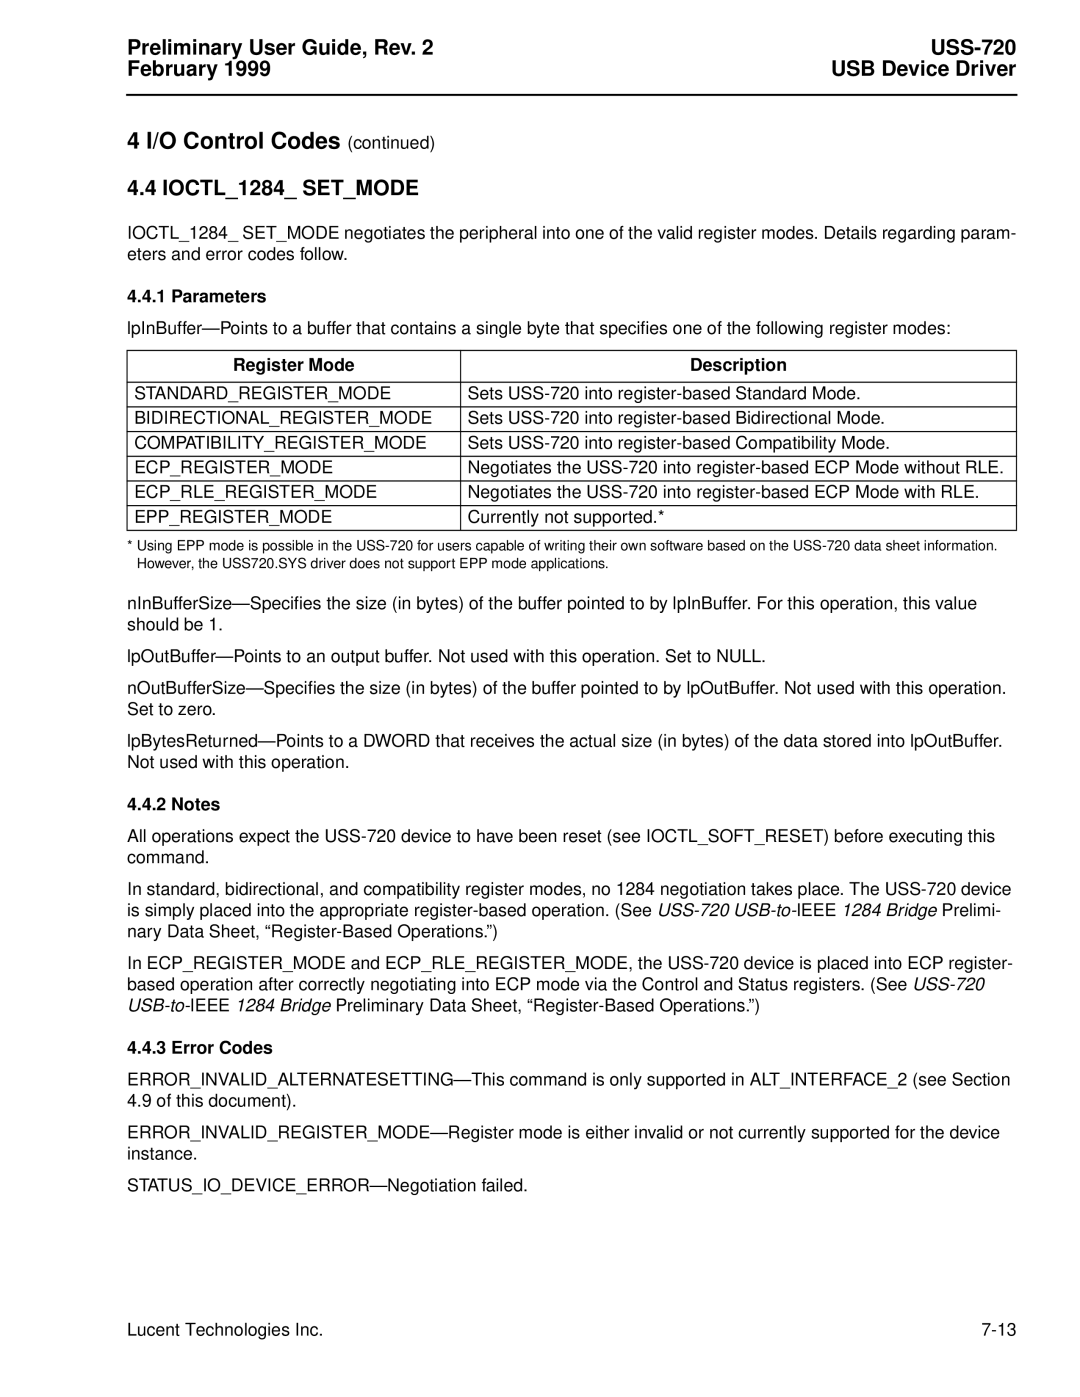 Lucent Technologies USS-720 manual IOCTL1284 SETMODE, 4 I/O Control Codes continued, Preliminary User Guide, Rev, February 